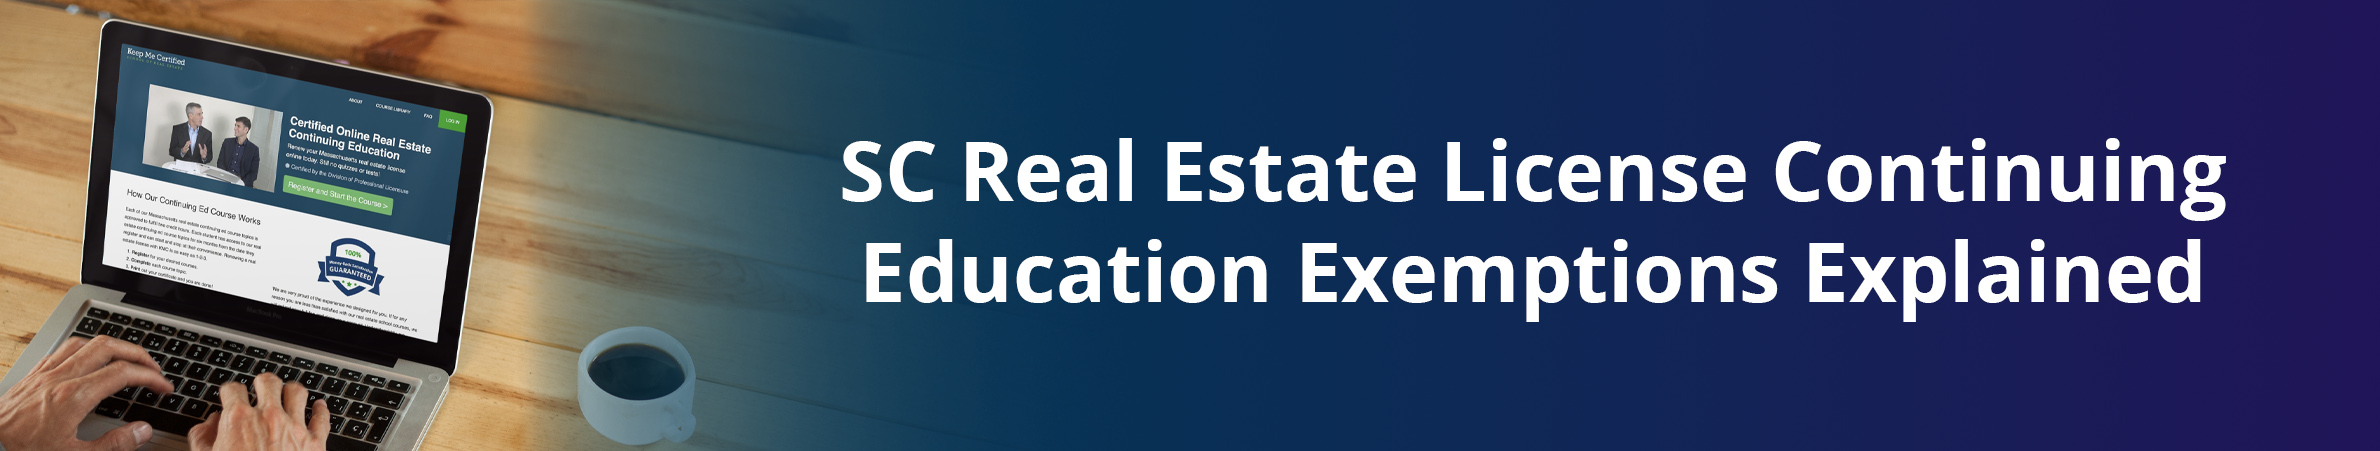 SC Real Estate CE Exemptions